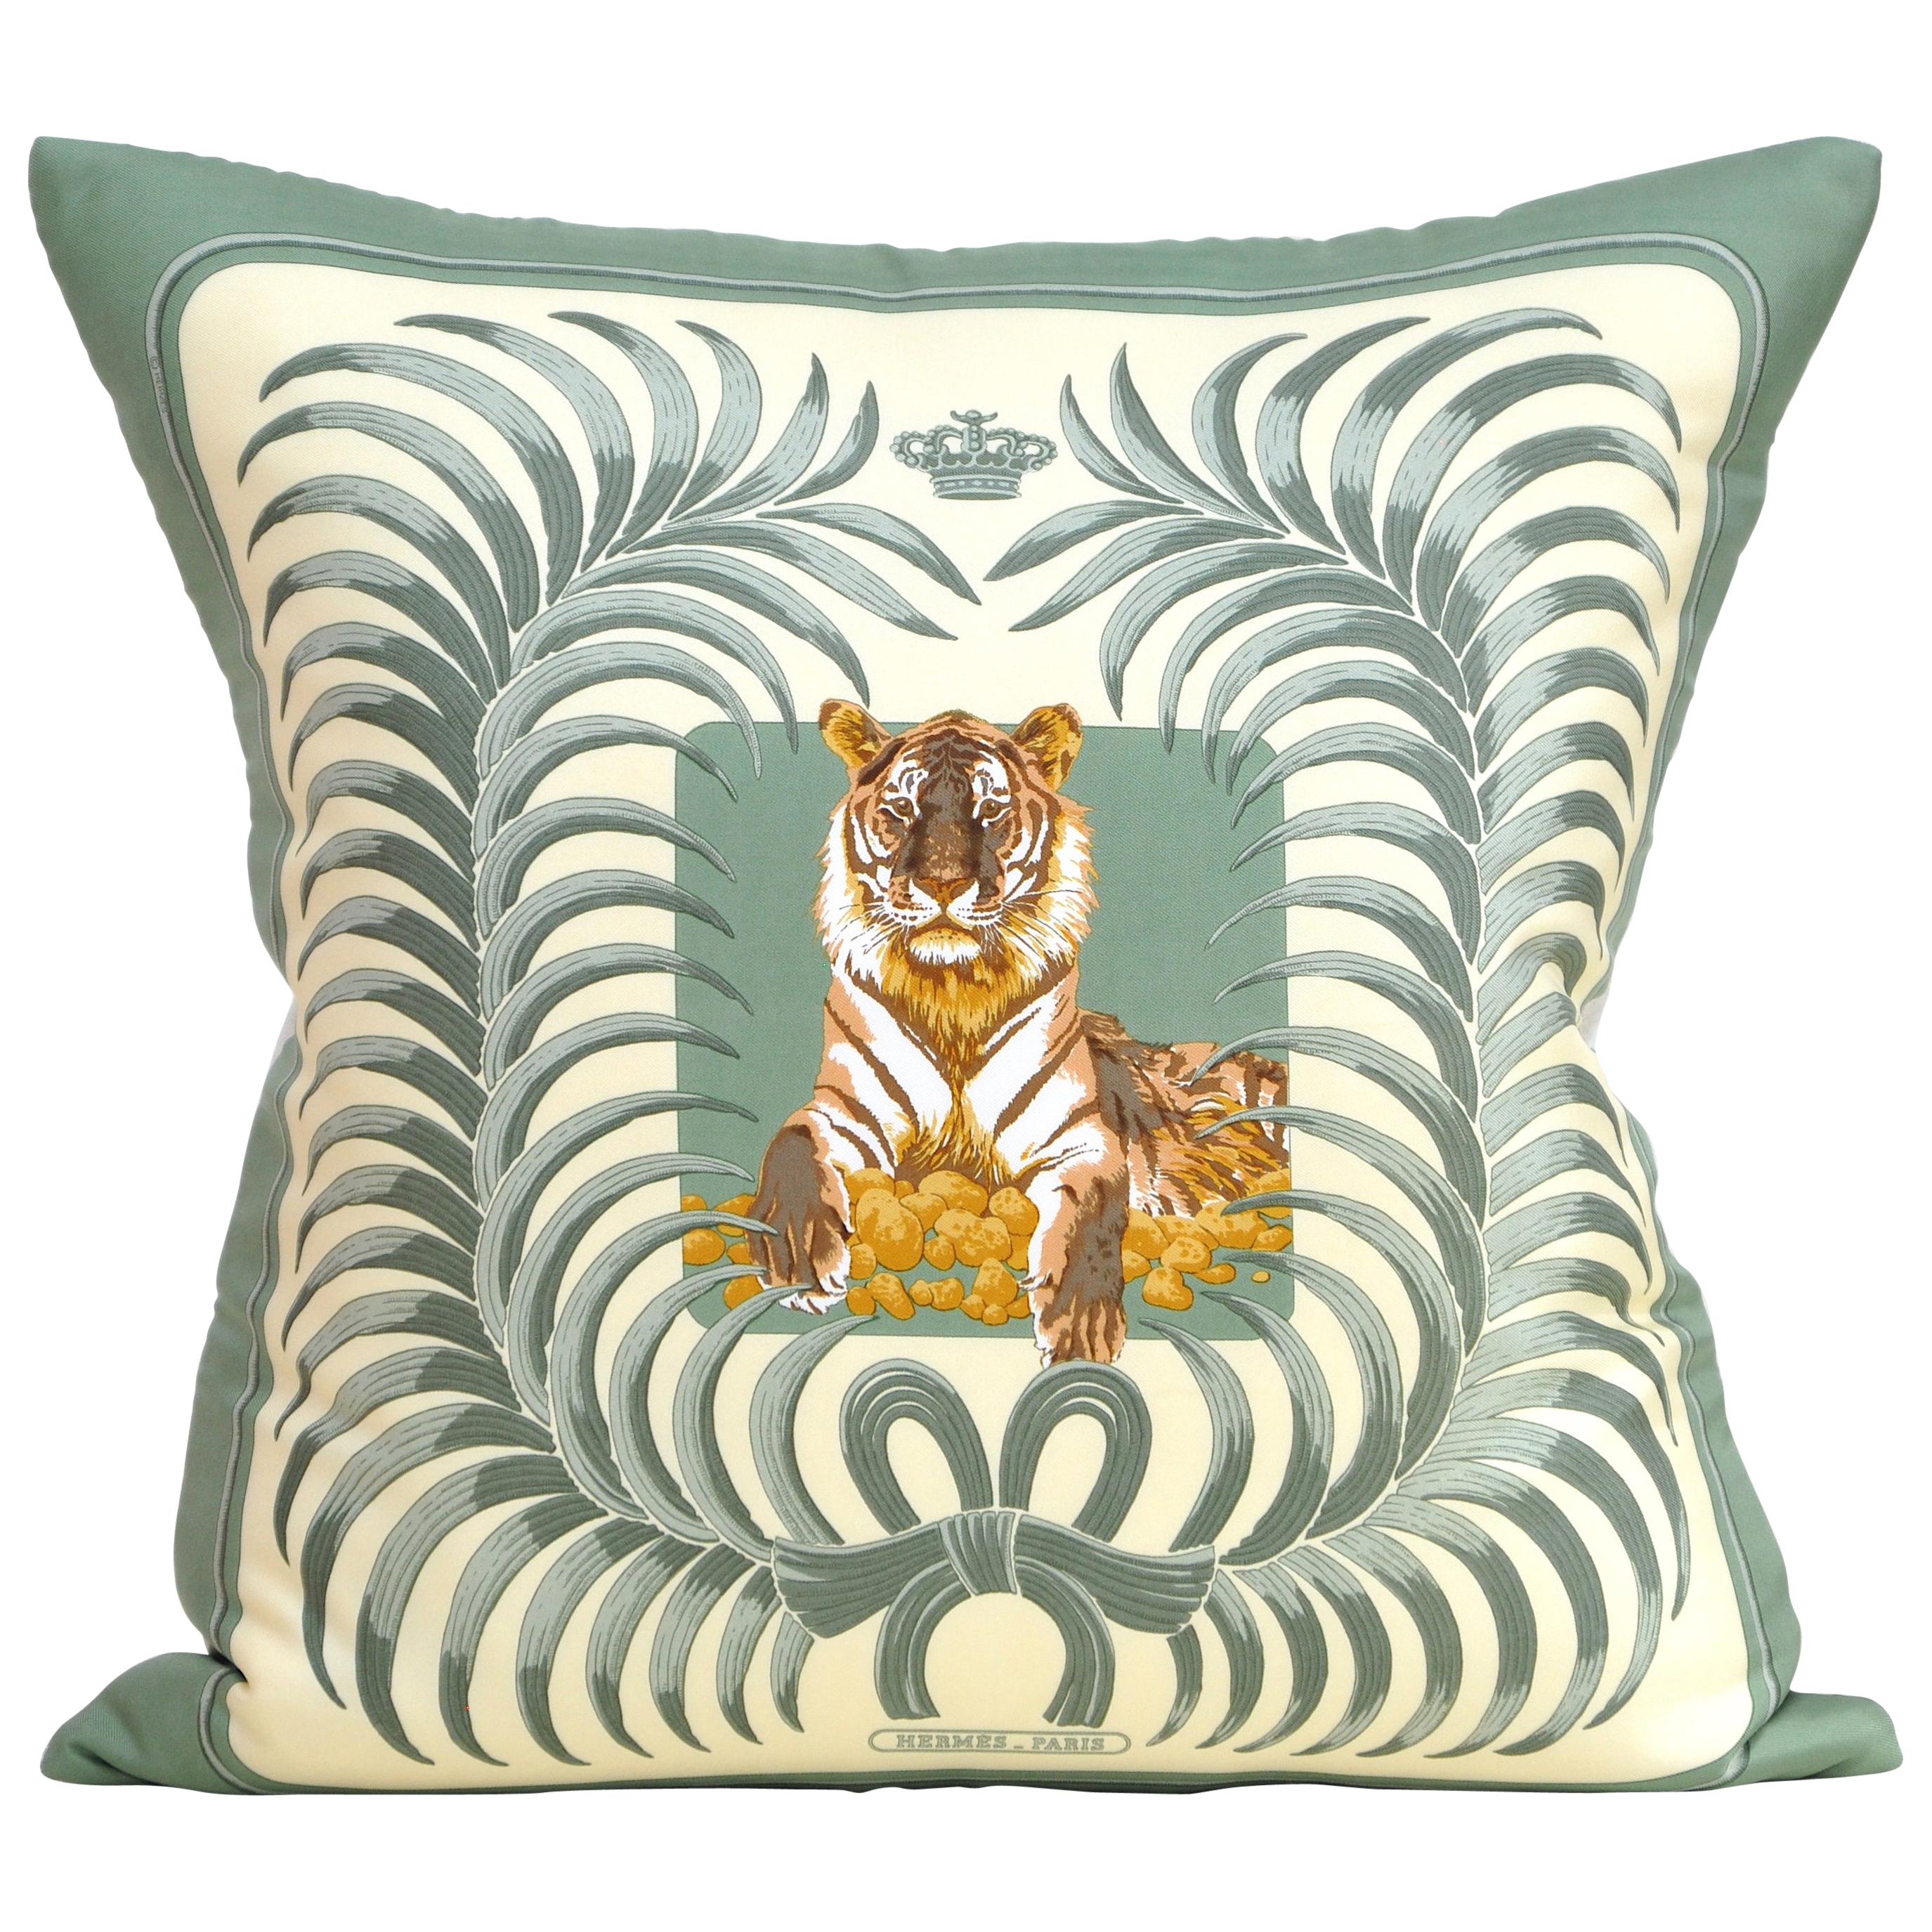 Title:
Pair of vintage Hermes tiger silk scarf and Irish linen cushions pillows green

The ‘crème de la crème’ of scarves, this beautiful set is a pair of one-of-a-kind custom made luxury cushions (pillows) from exquisite vintage silk Hermes